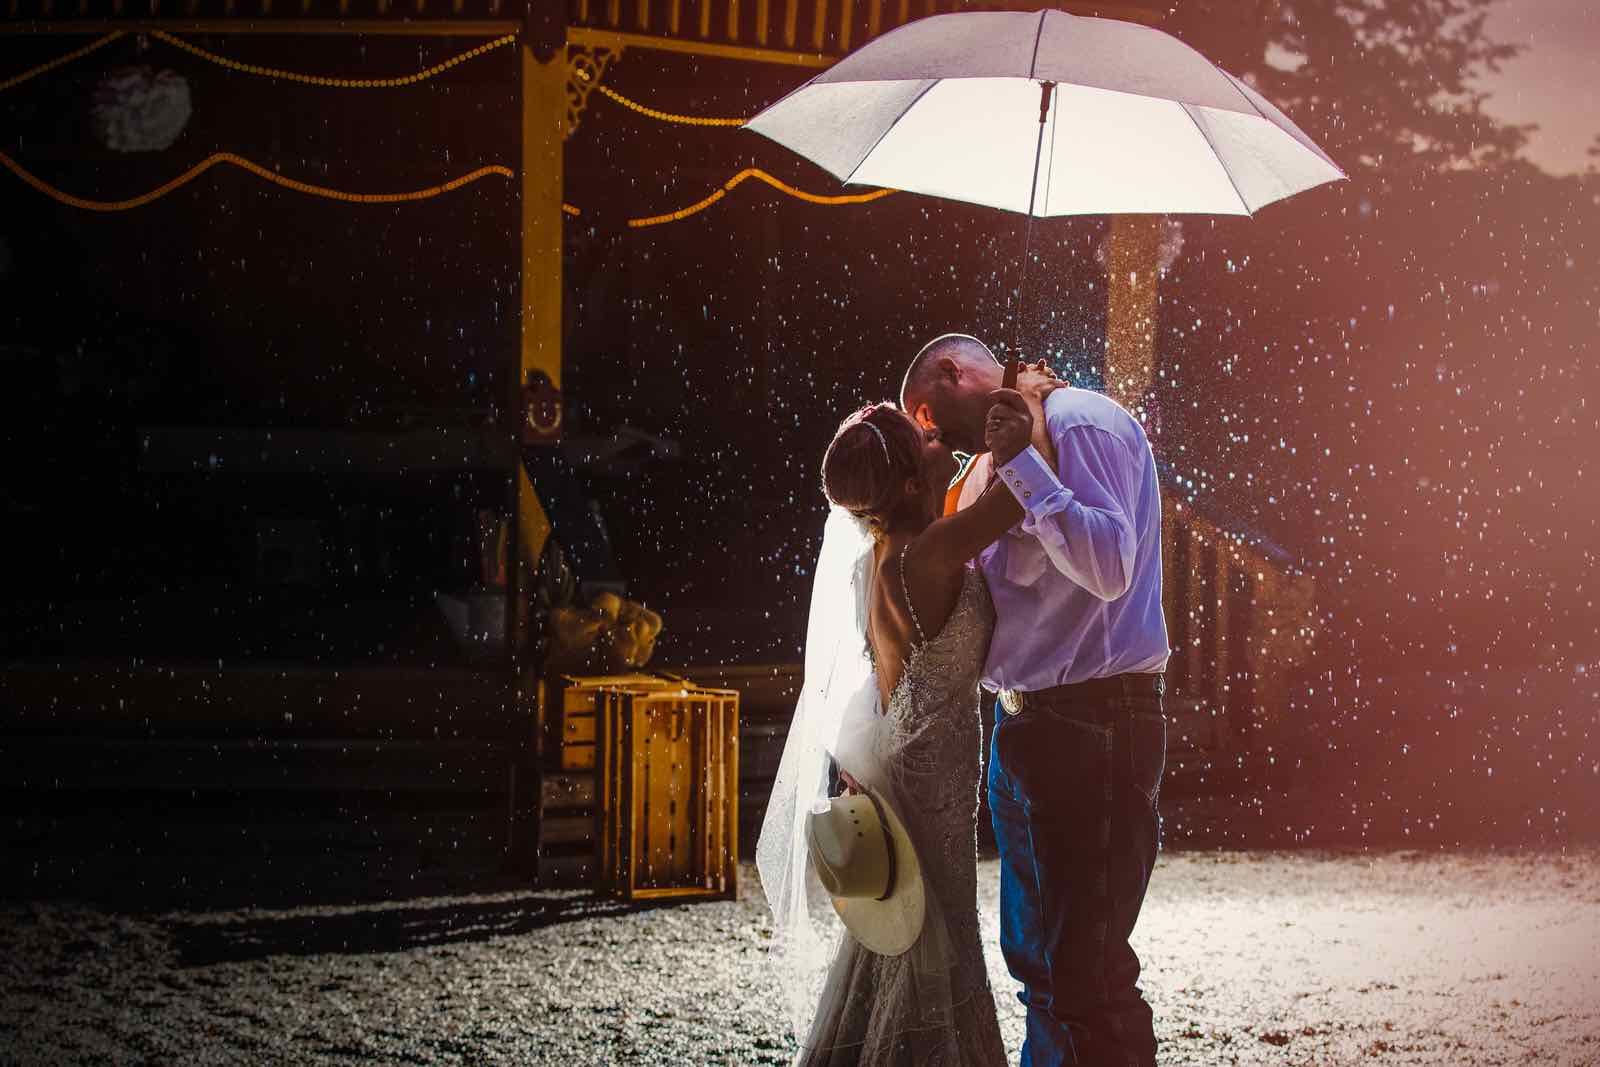 6 ideas for Dealing with Rain on Your Wedding Day